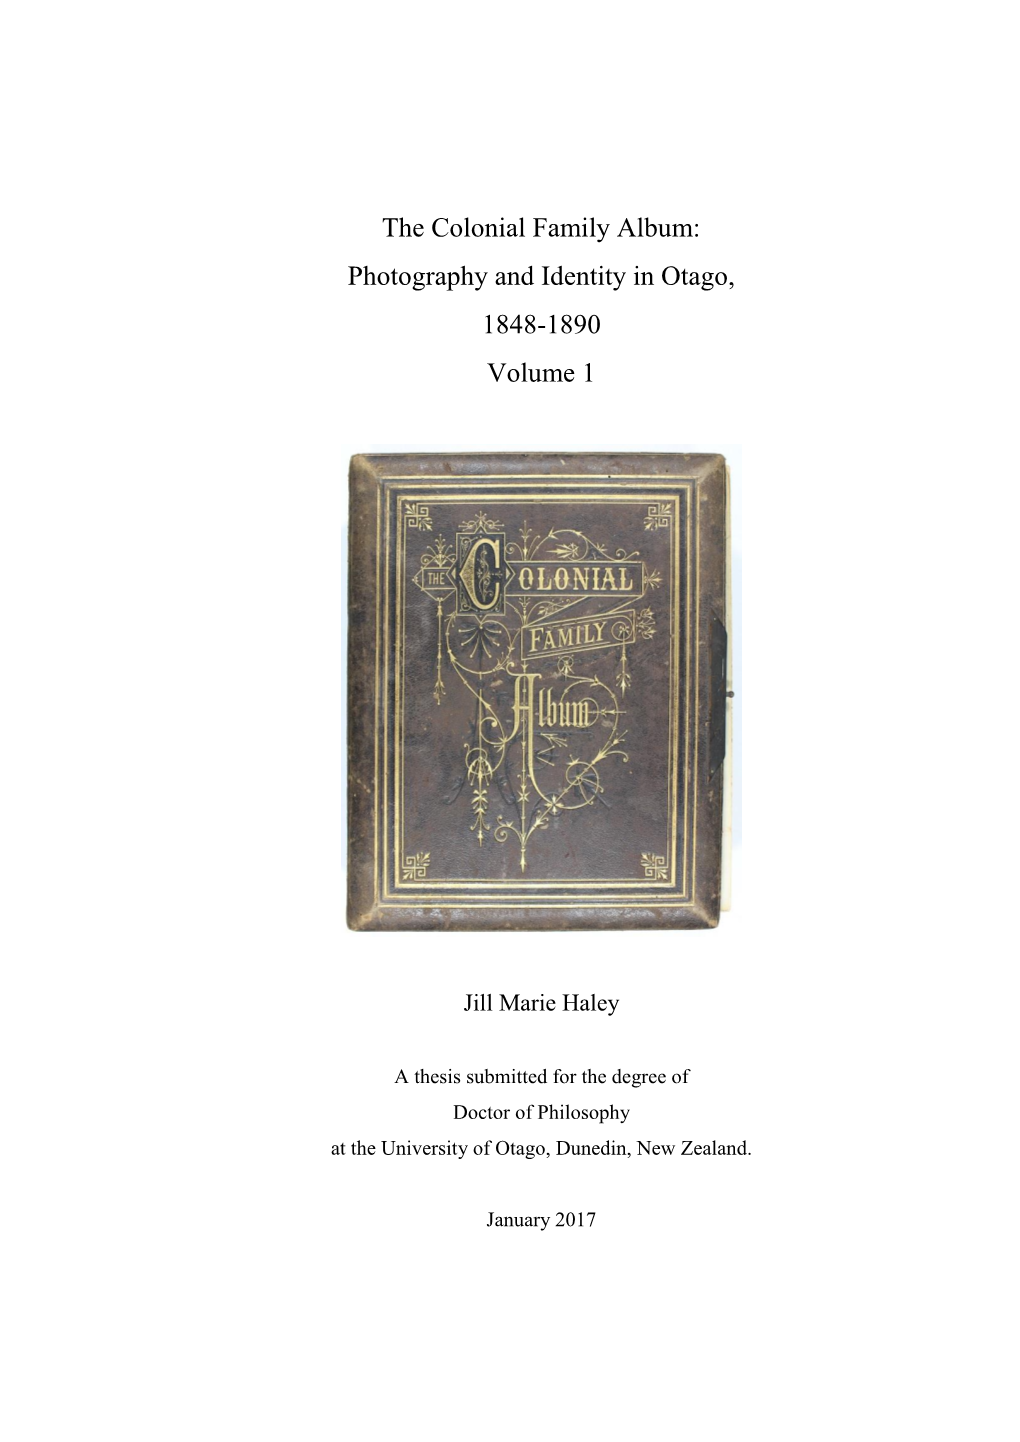 The Colonial Family Album: Photography and Identity in Otago, 1848-1890 Volume 1